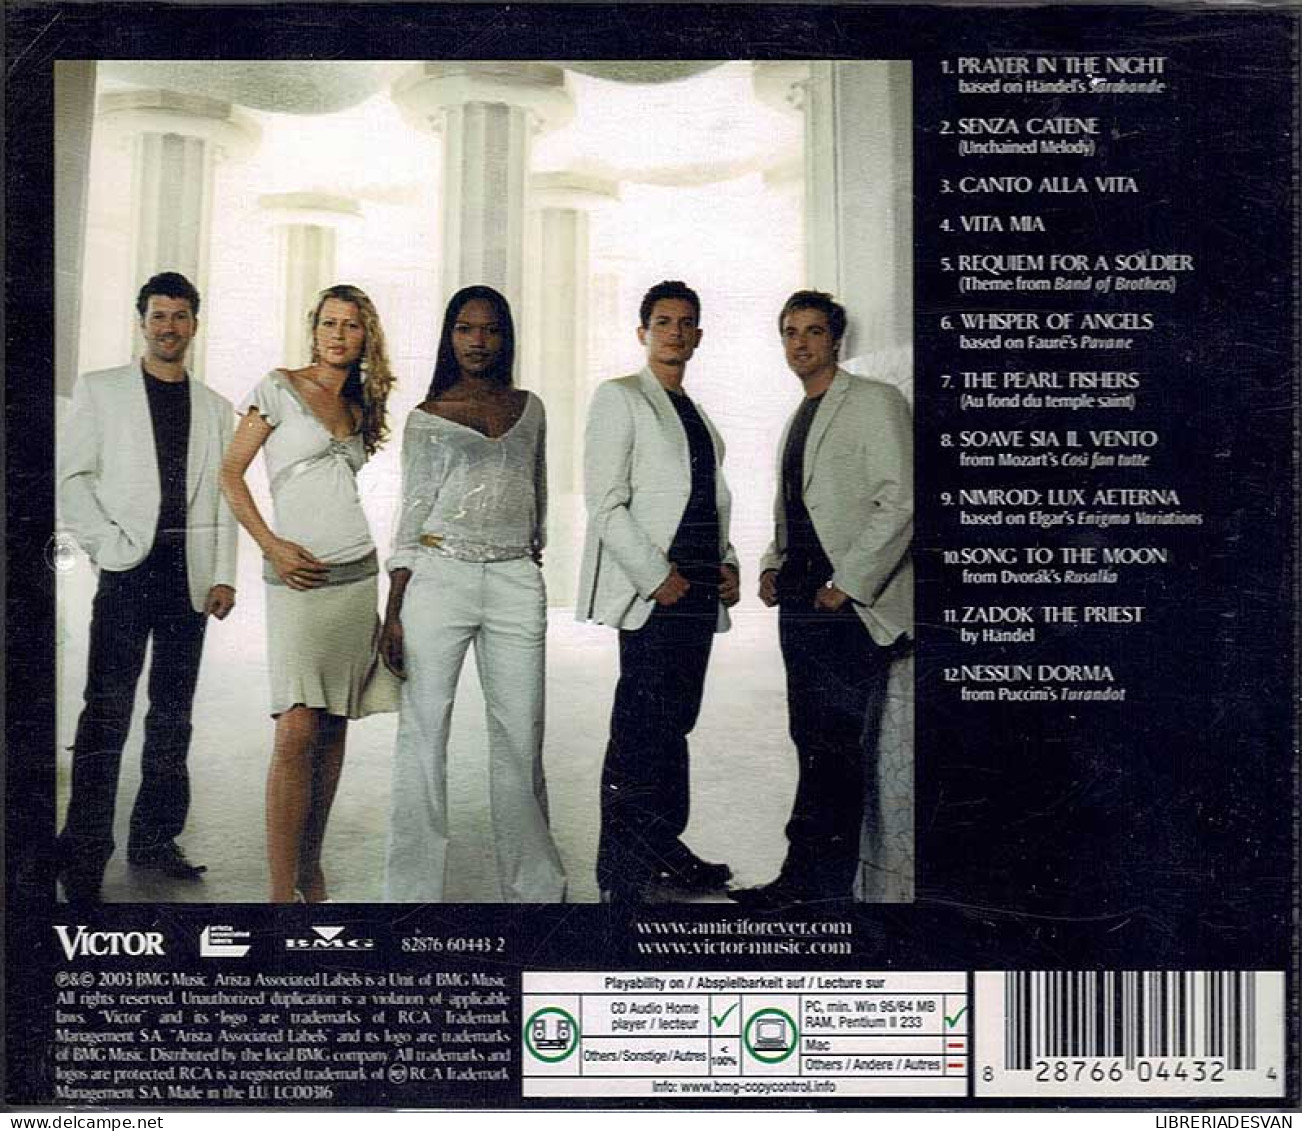 Amici Forever - The Opera Band. CD - Clásica